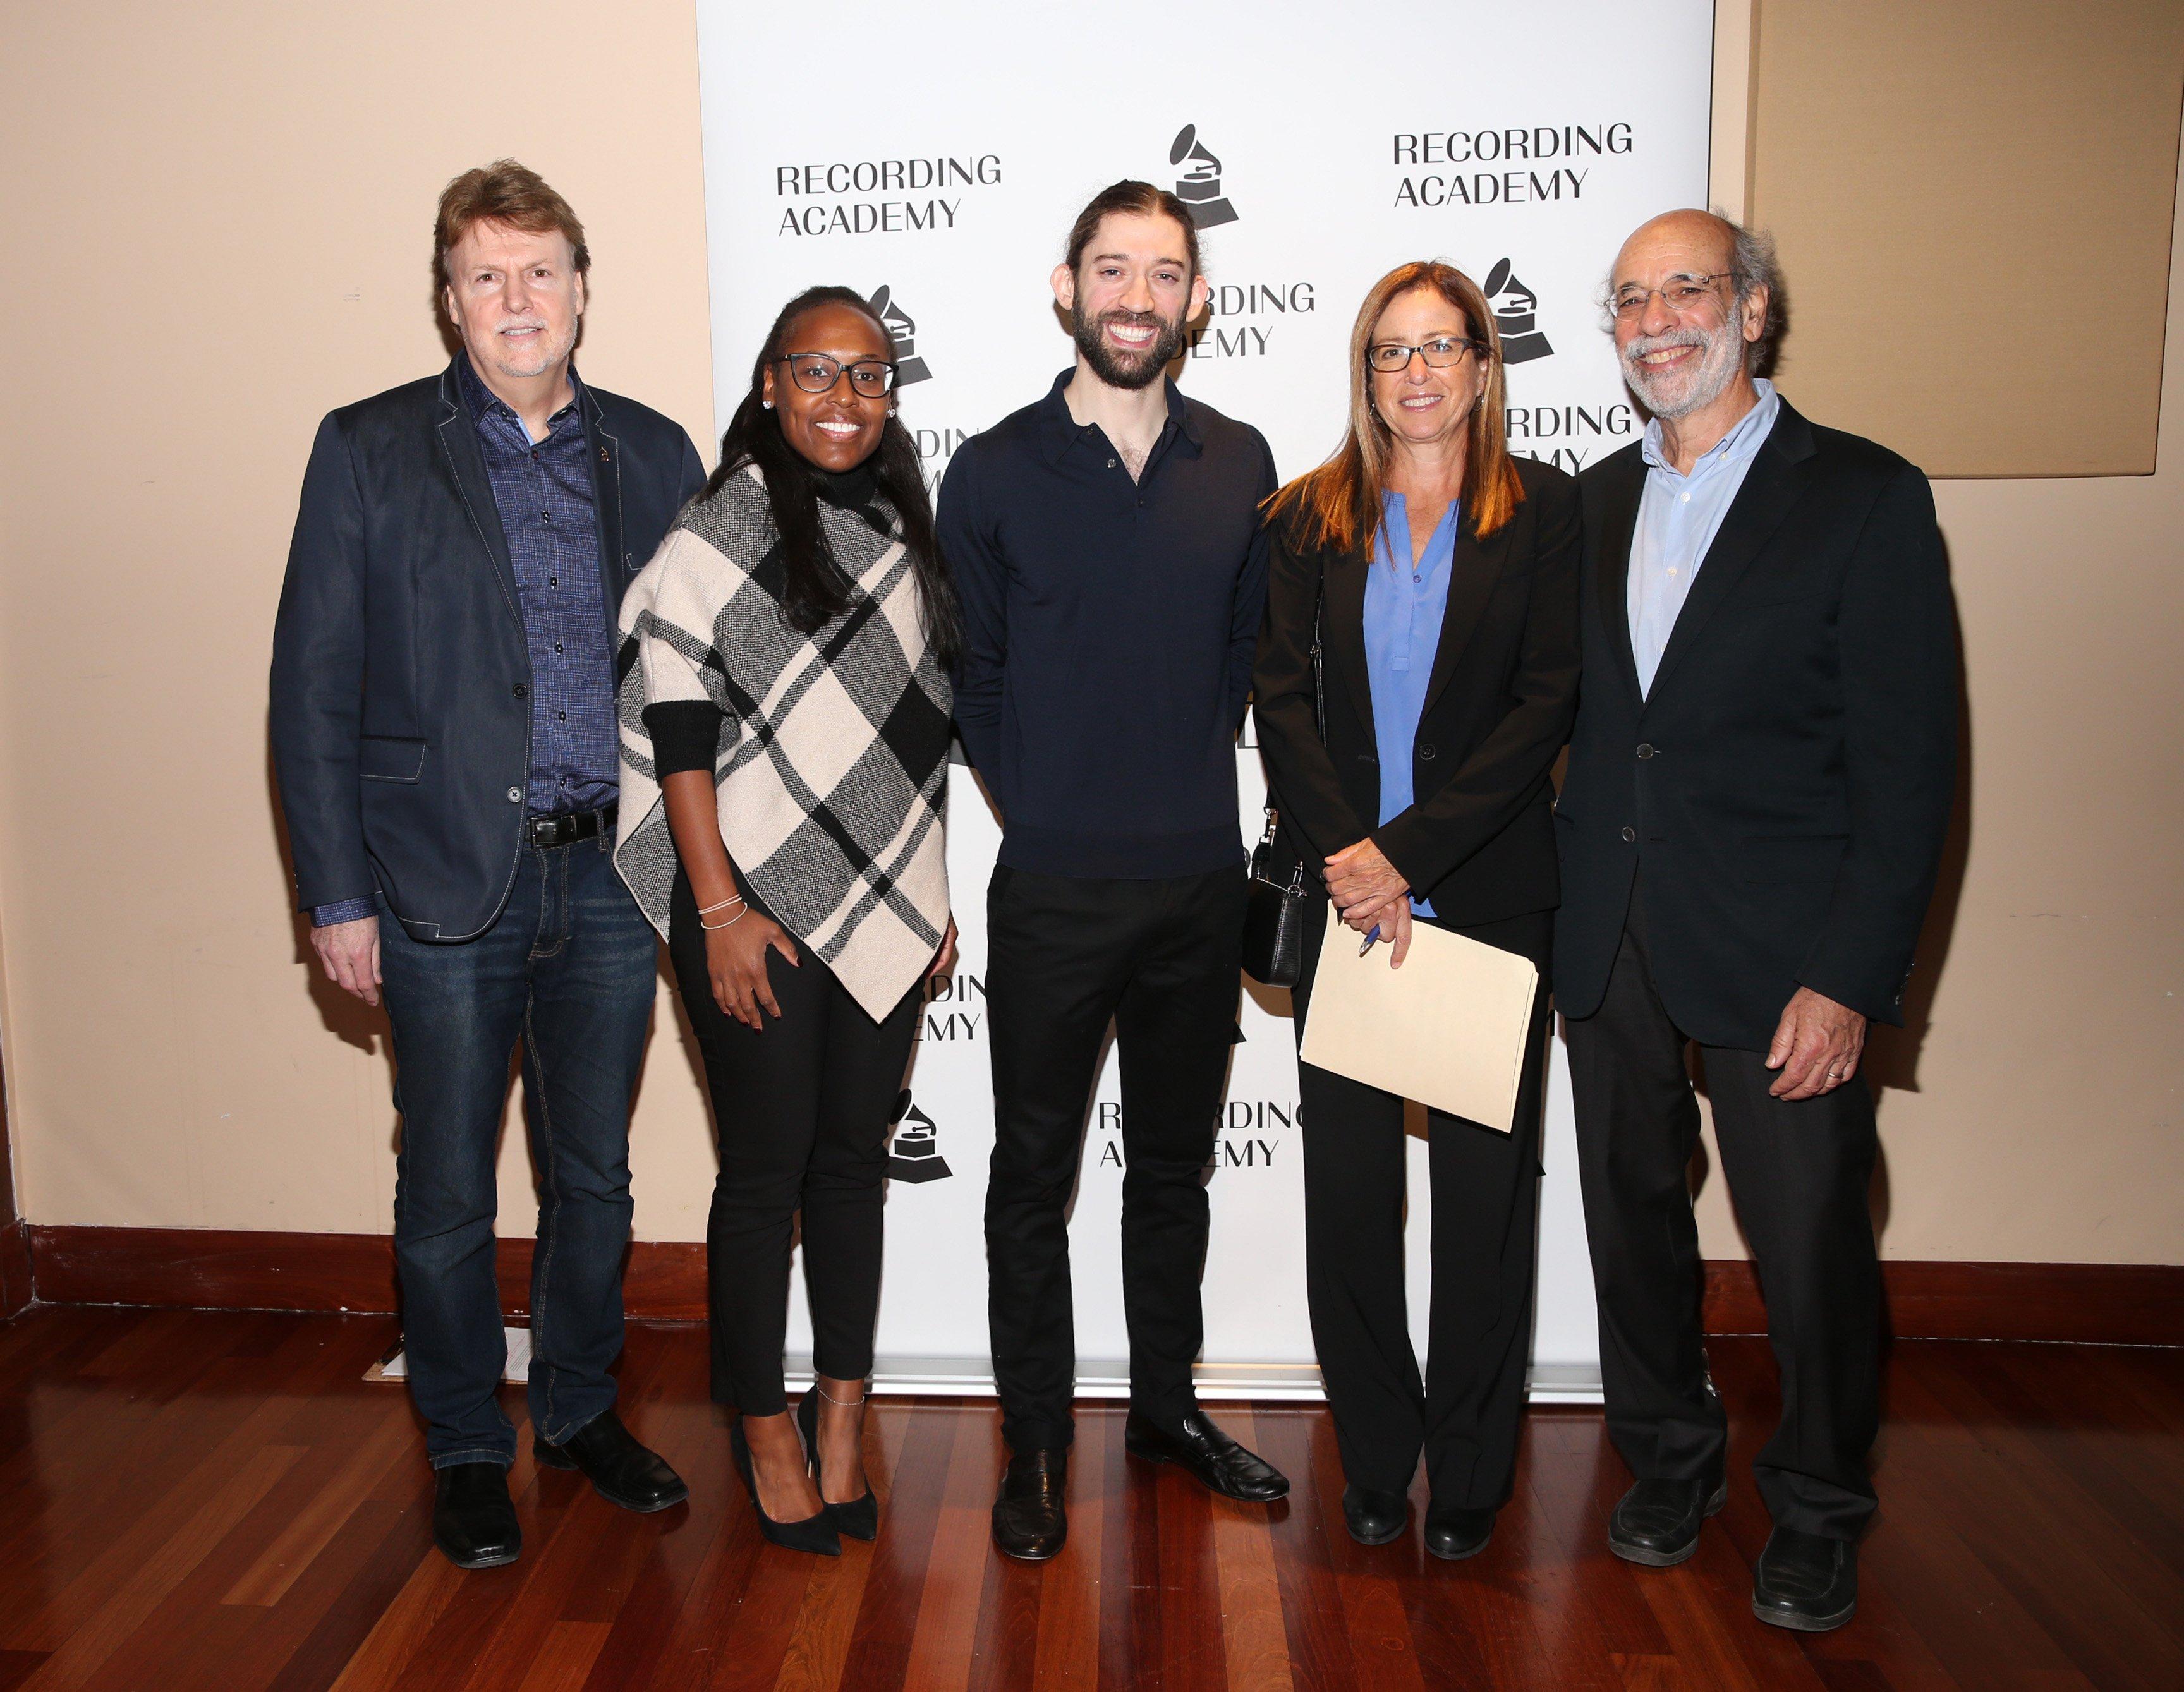 Neil Crilly, Sharde Simpson, Ben Landry, Sandra Crawshaw-Sparks and Elliot Groffman attending the Evolution of the Record Contract Panel